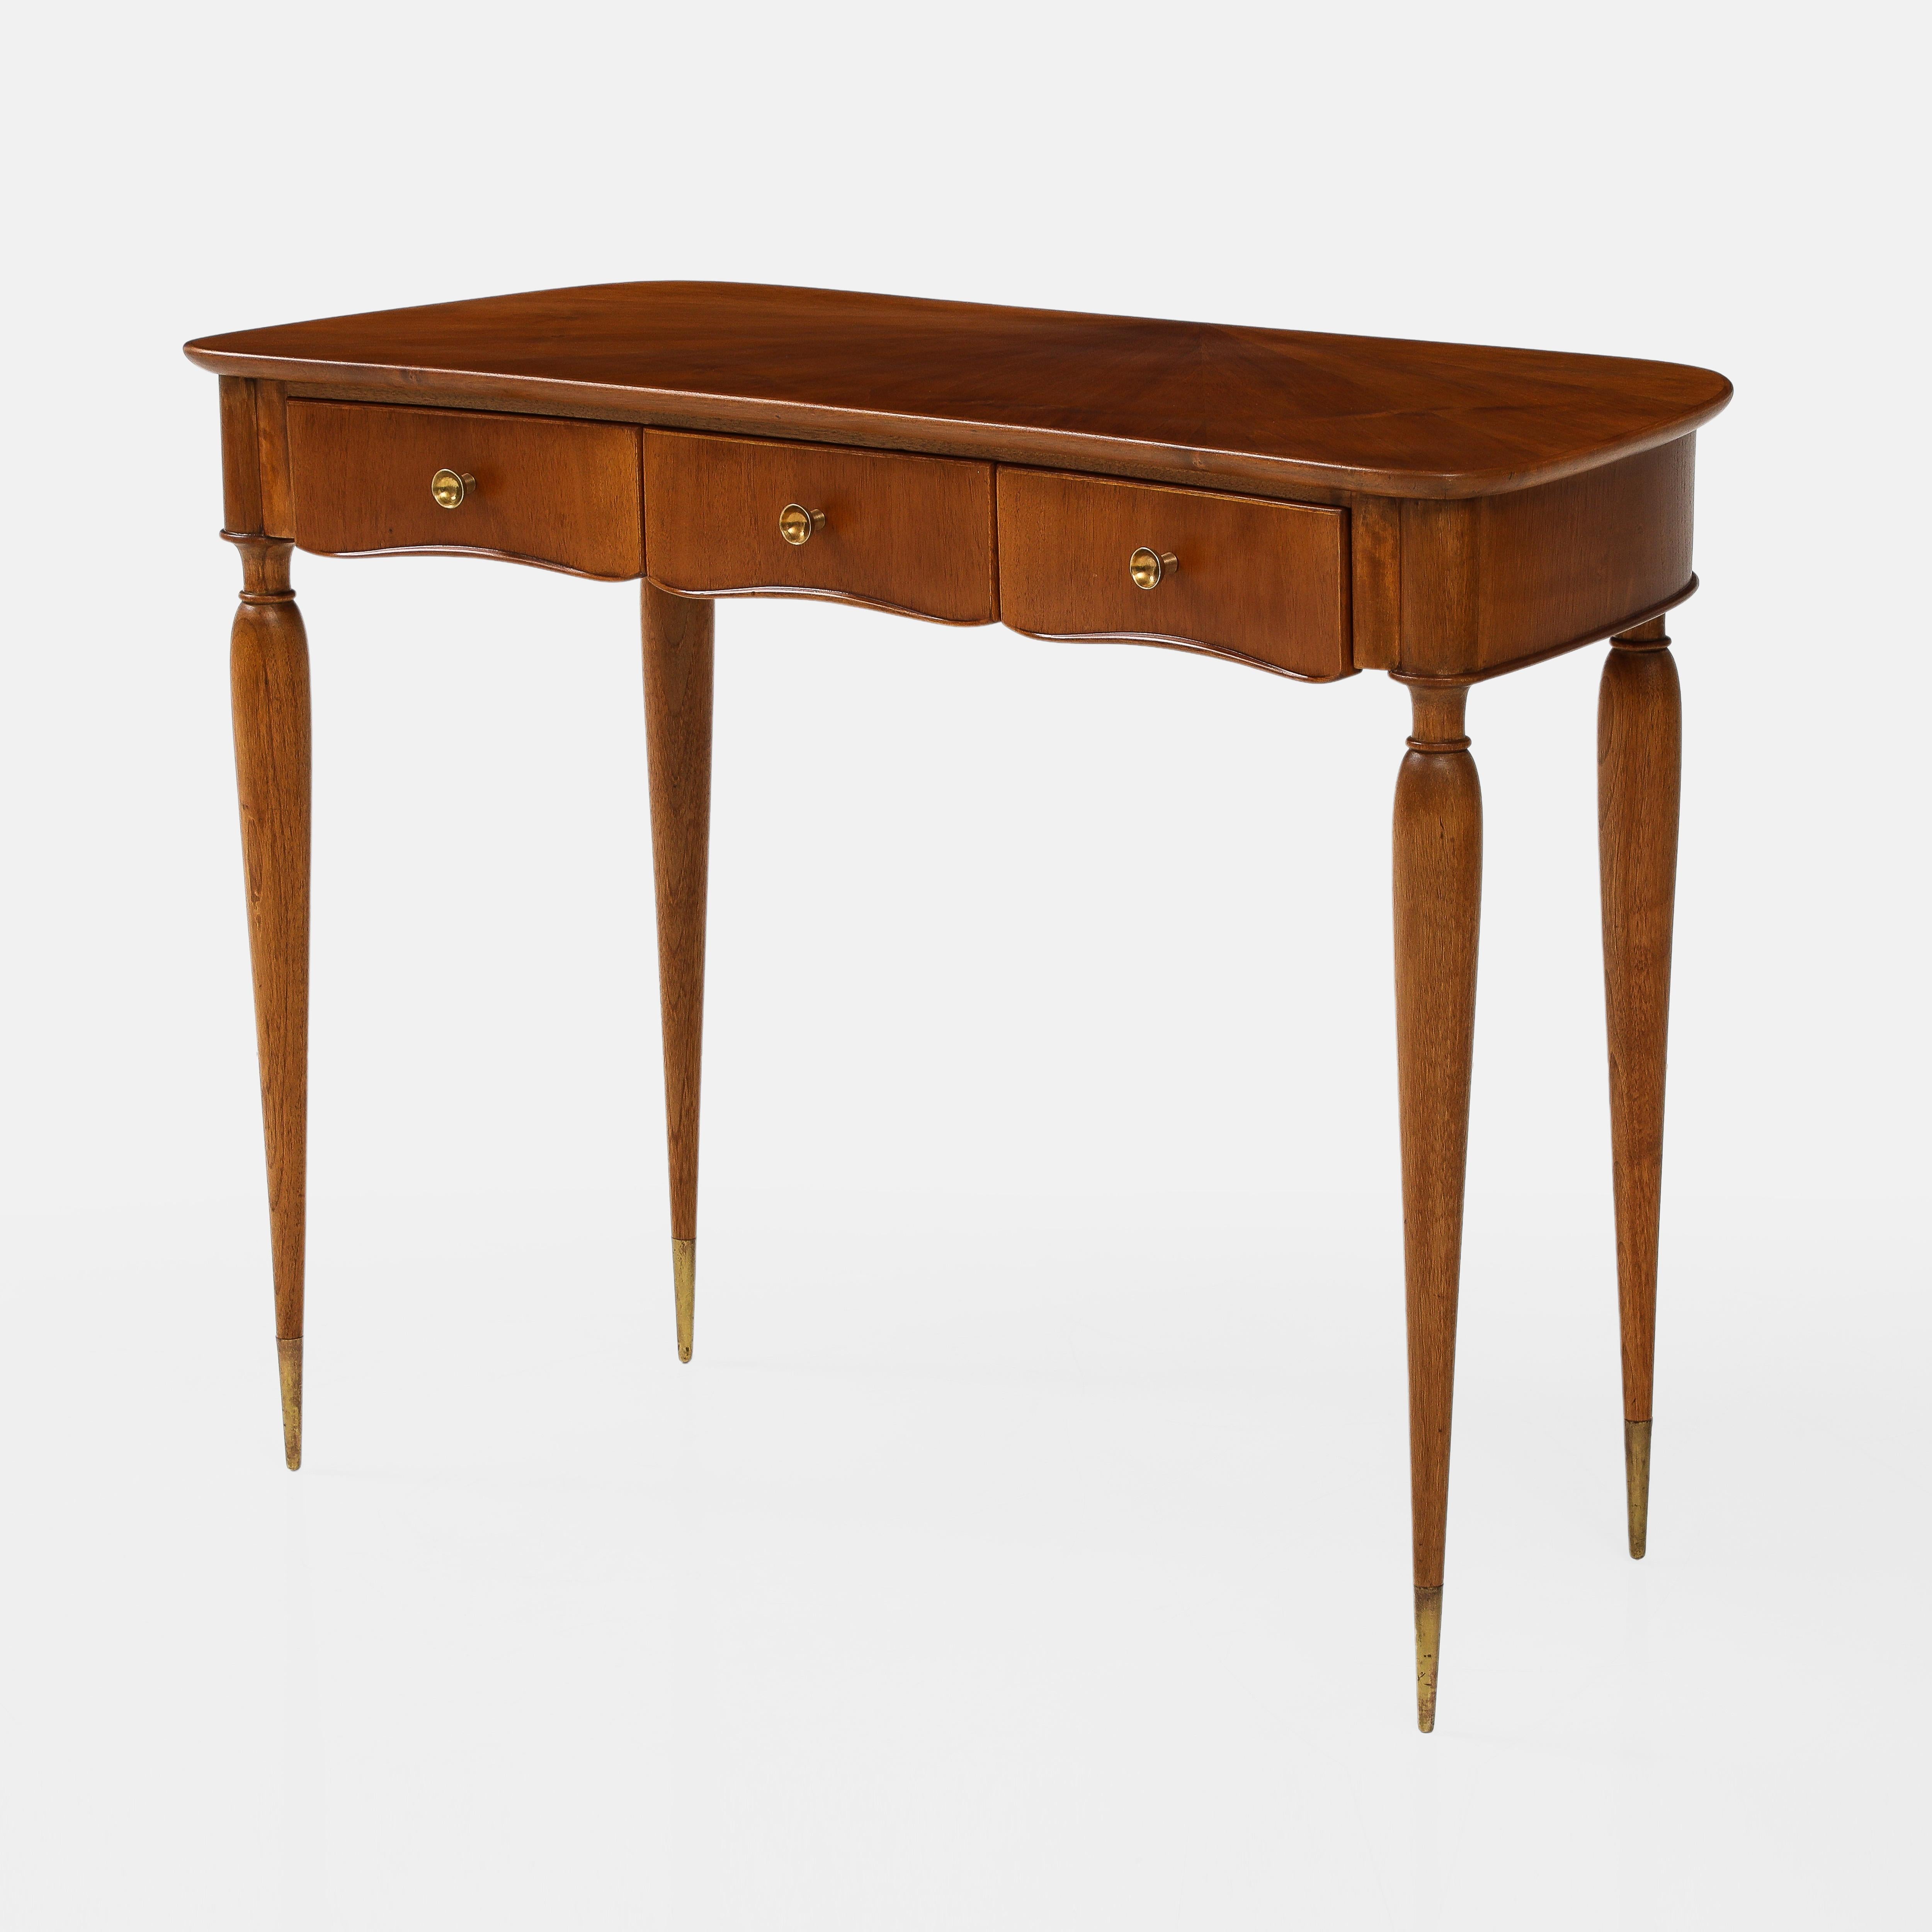 1950s Italian rare walnut wood console or vanity dressing table with slightly curved front edge, three small drawers, and tapering slender pencil legs ending in brass sabots.  This exquisite console or vanity table exhibits fine Italian